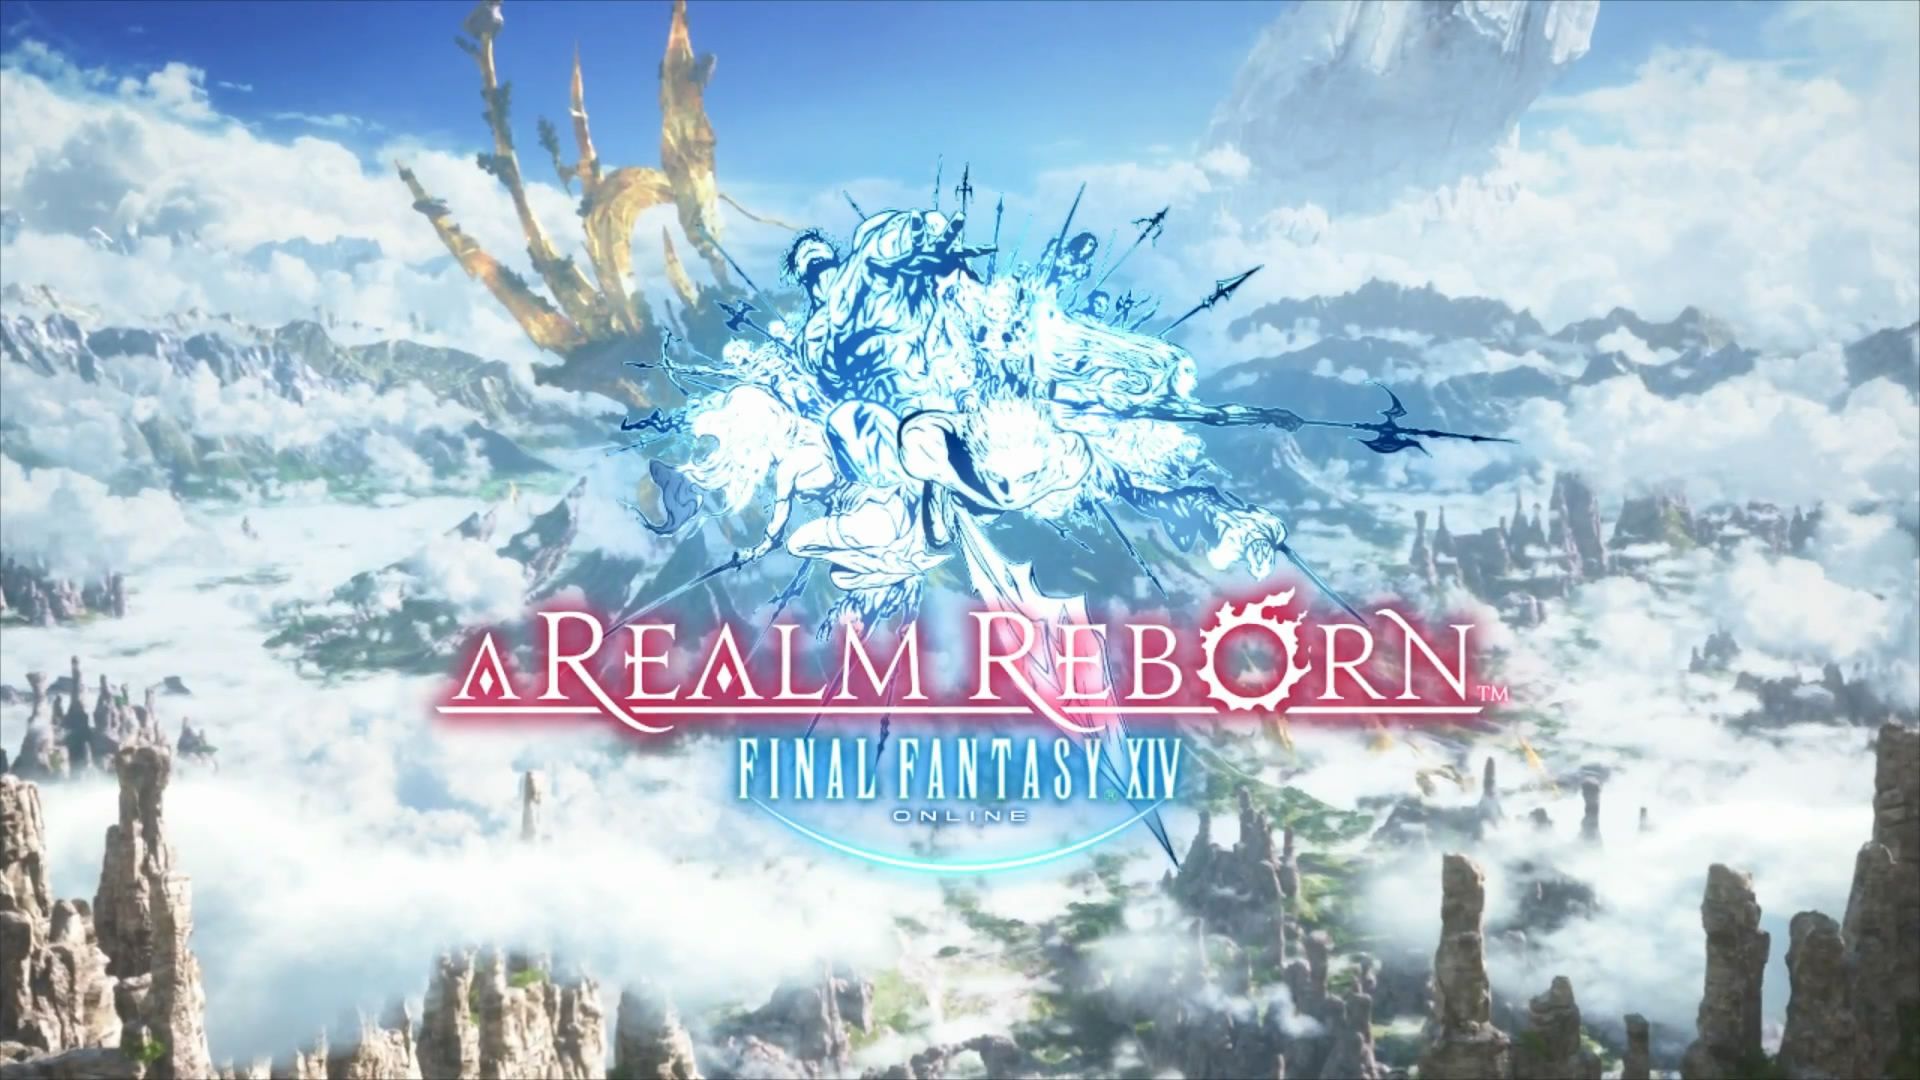 Final Fantasy XIV: A Realm Reborn | Cubed Gamers